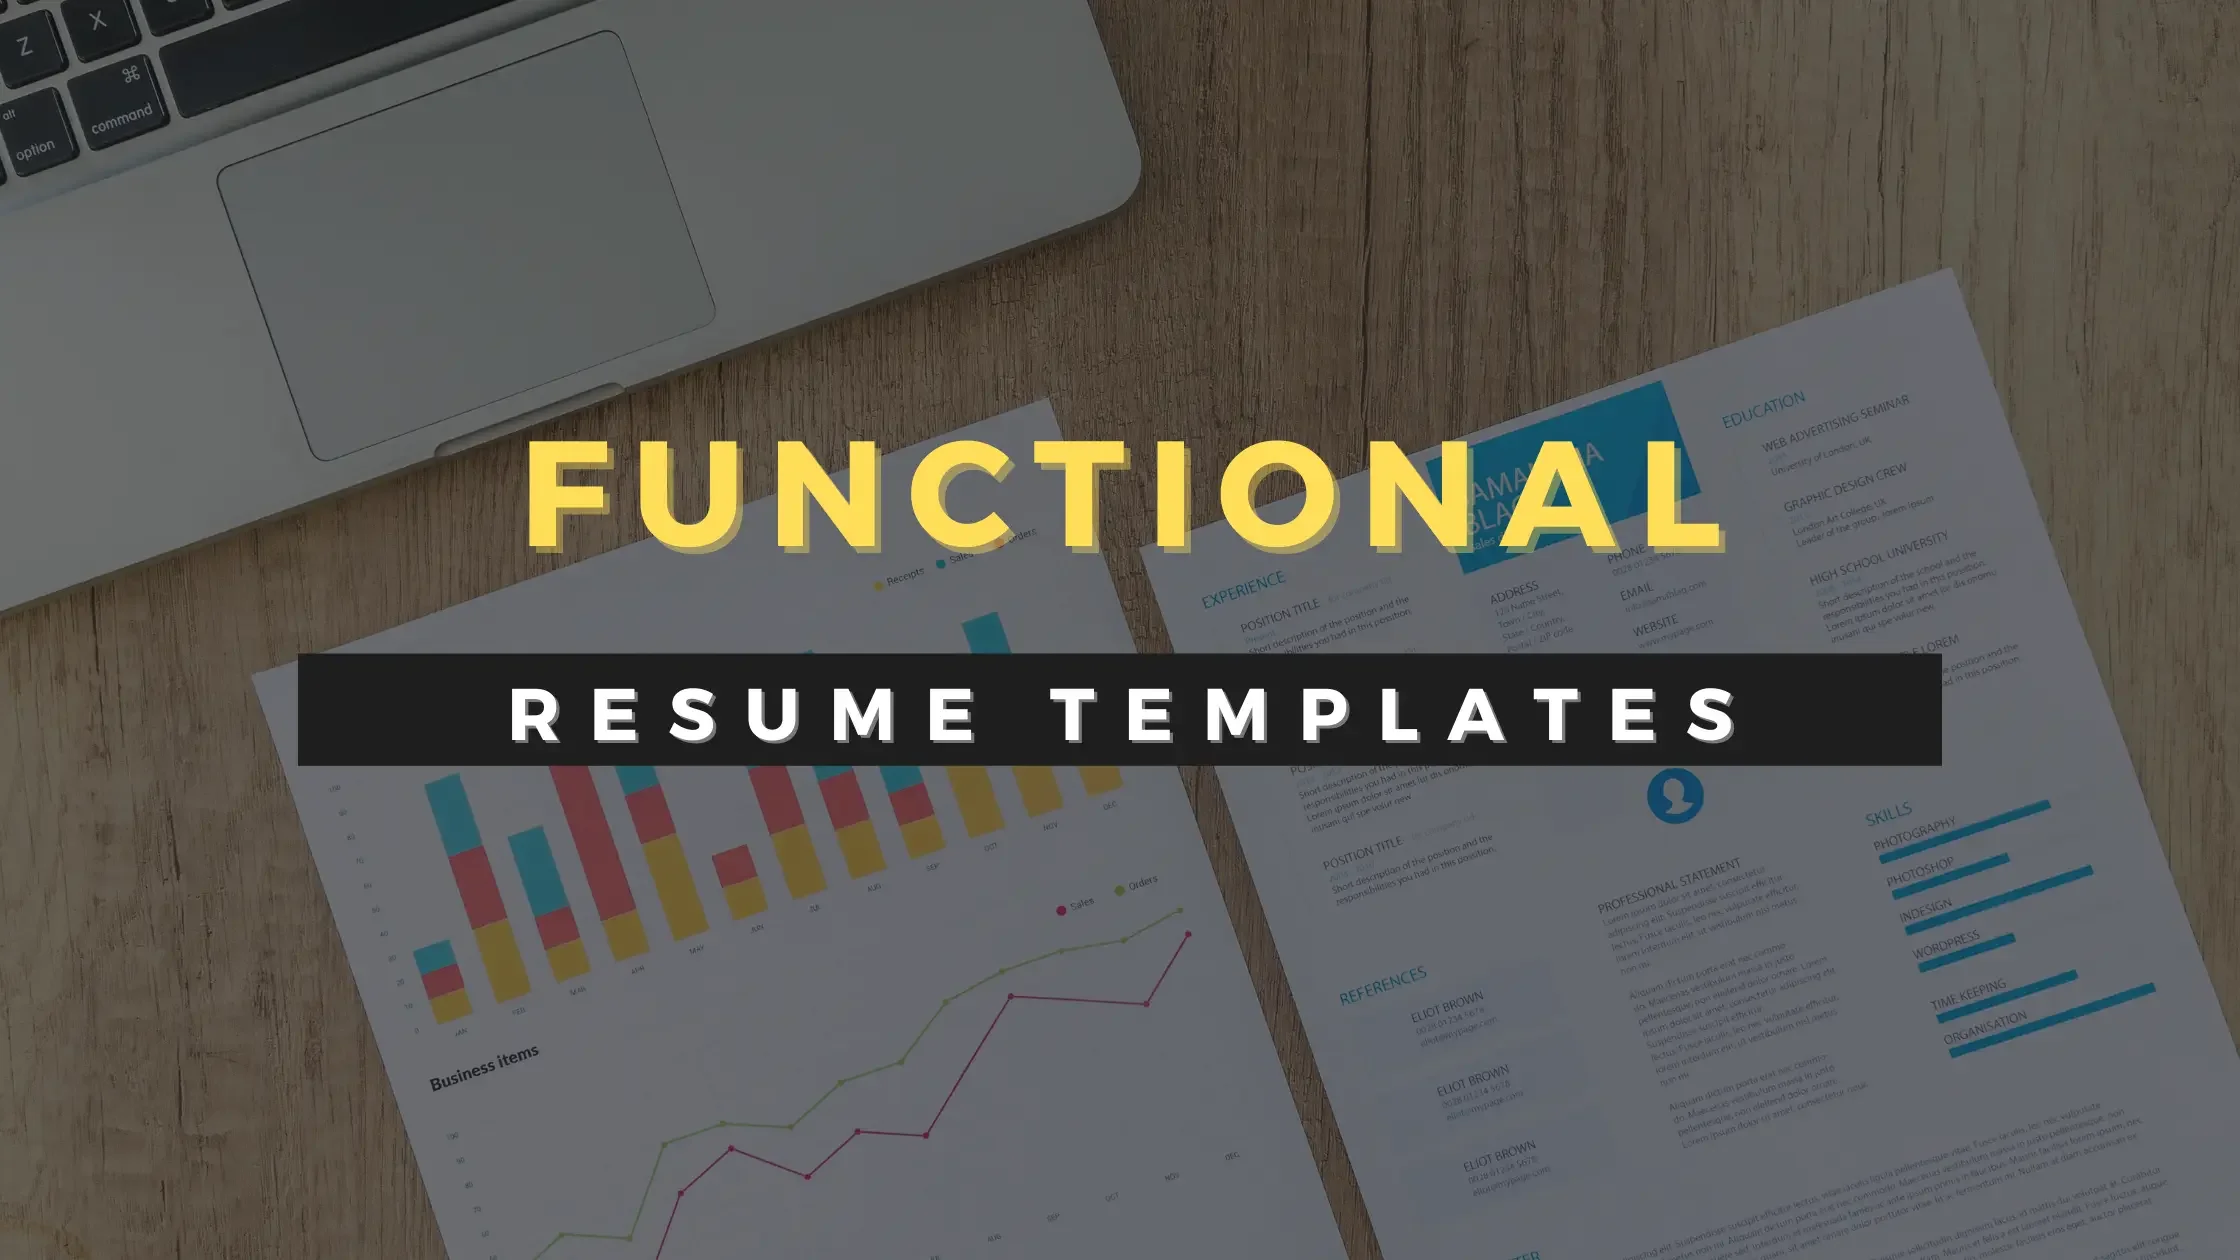 Function resume templates 2022